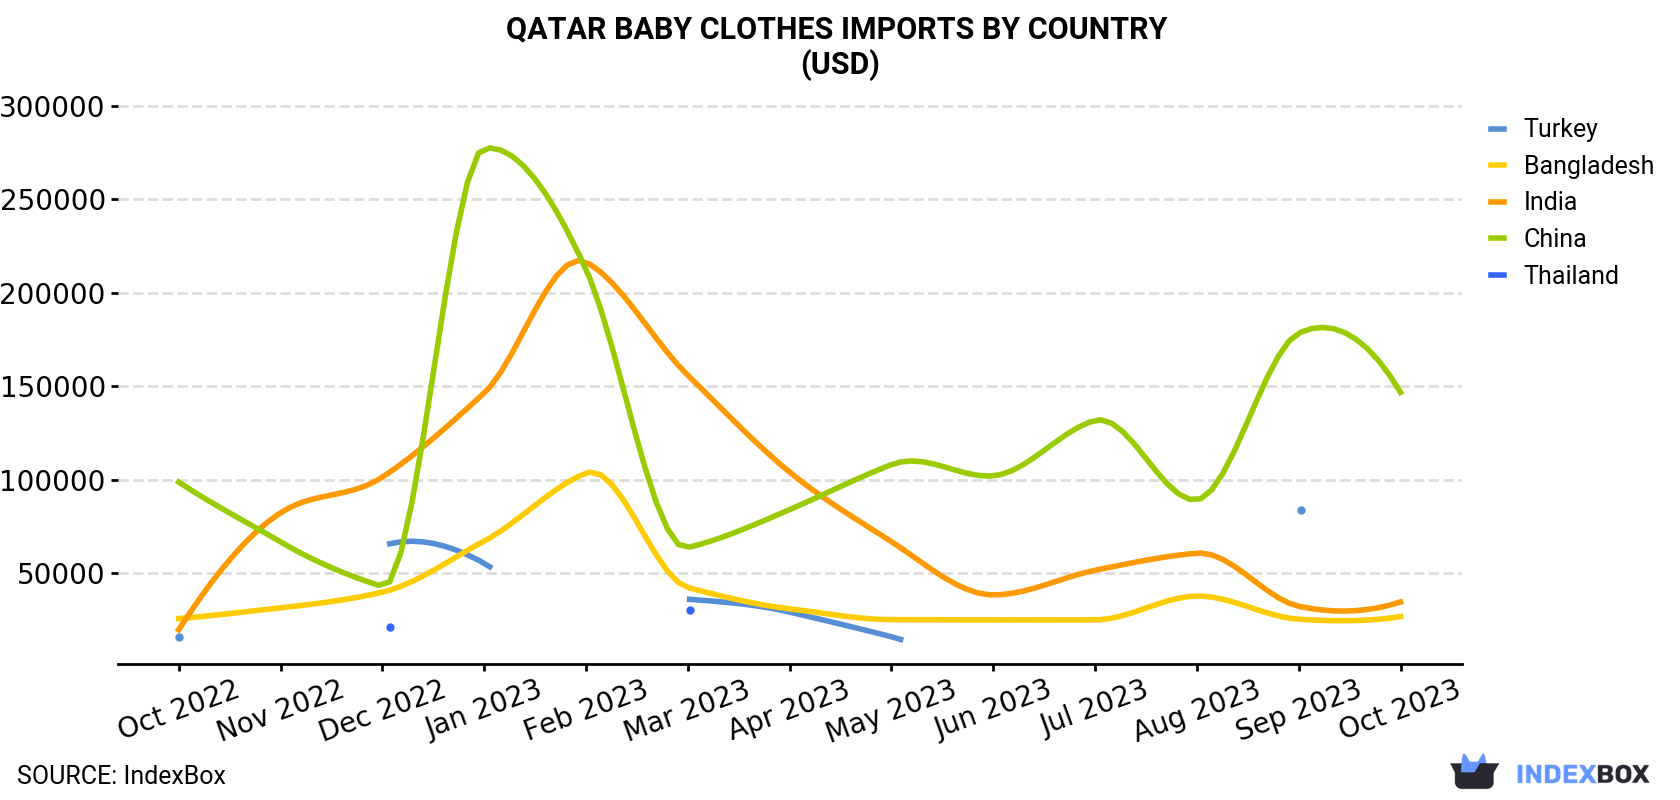 Qatar Baby Clothes Imports By Country (USD)